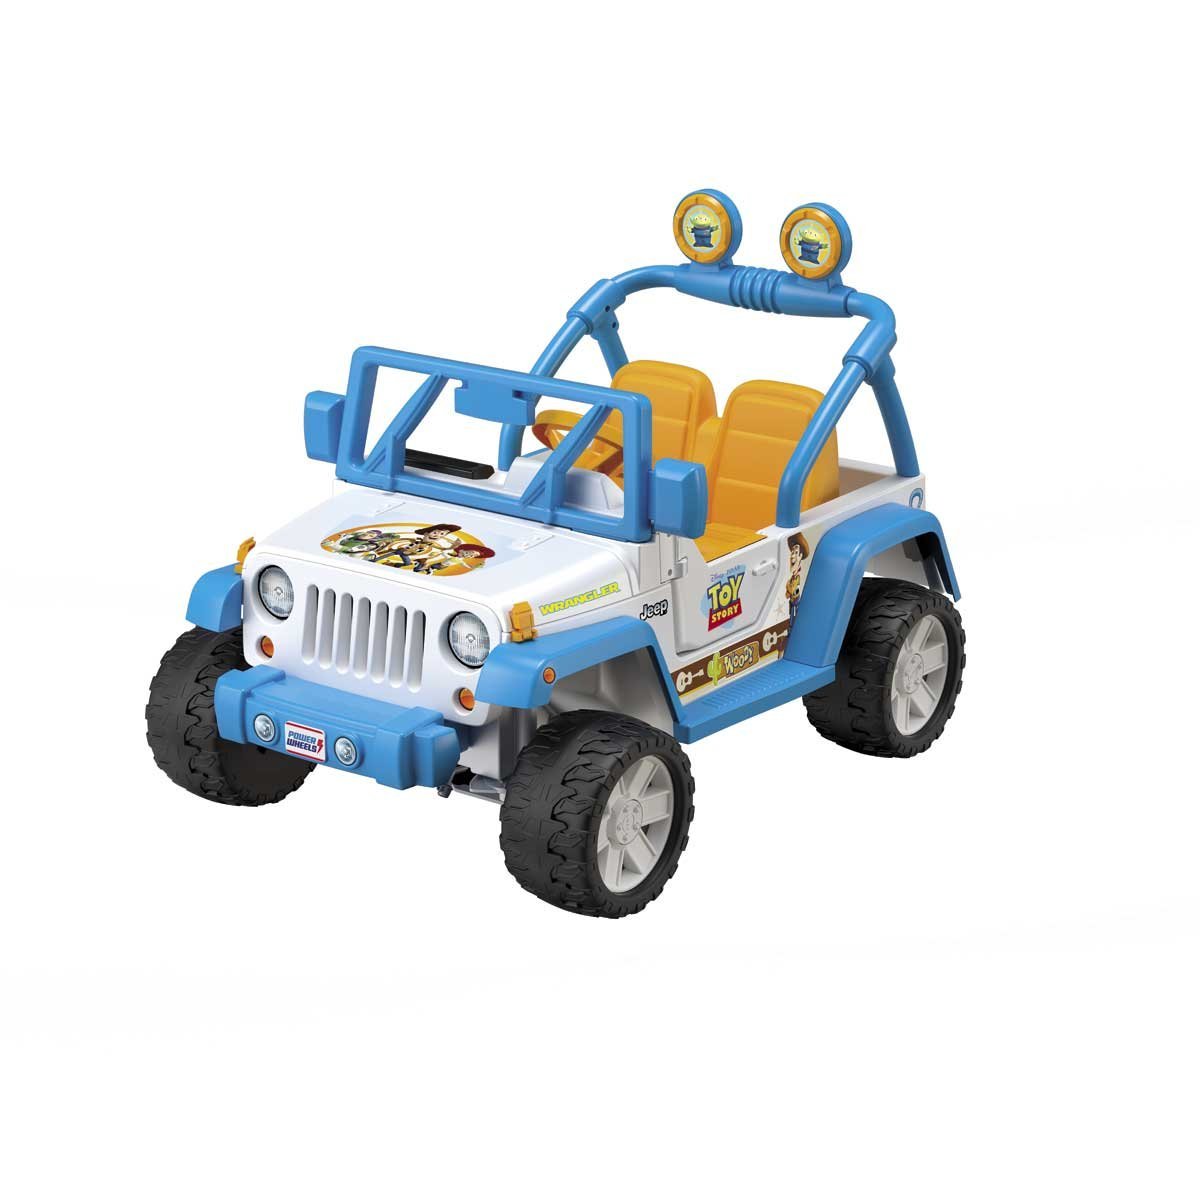 Montable Eléctrico Jeep Buzz Lightyear Toy Story 4